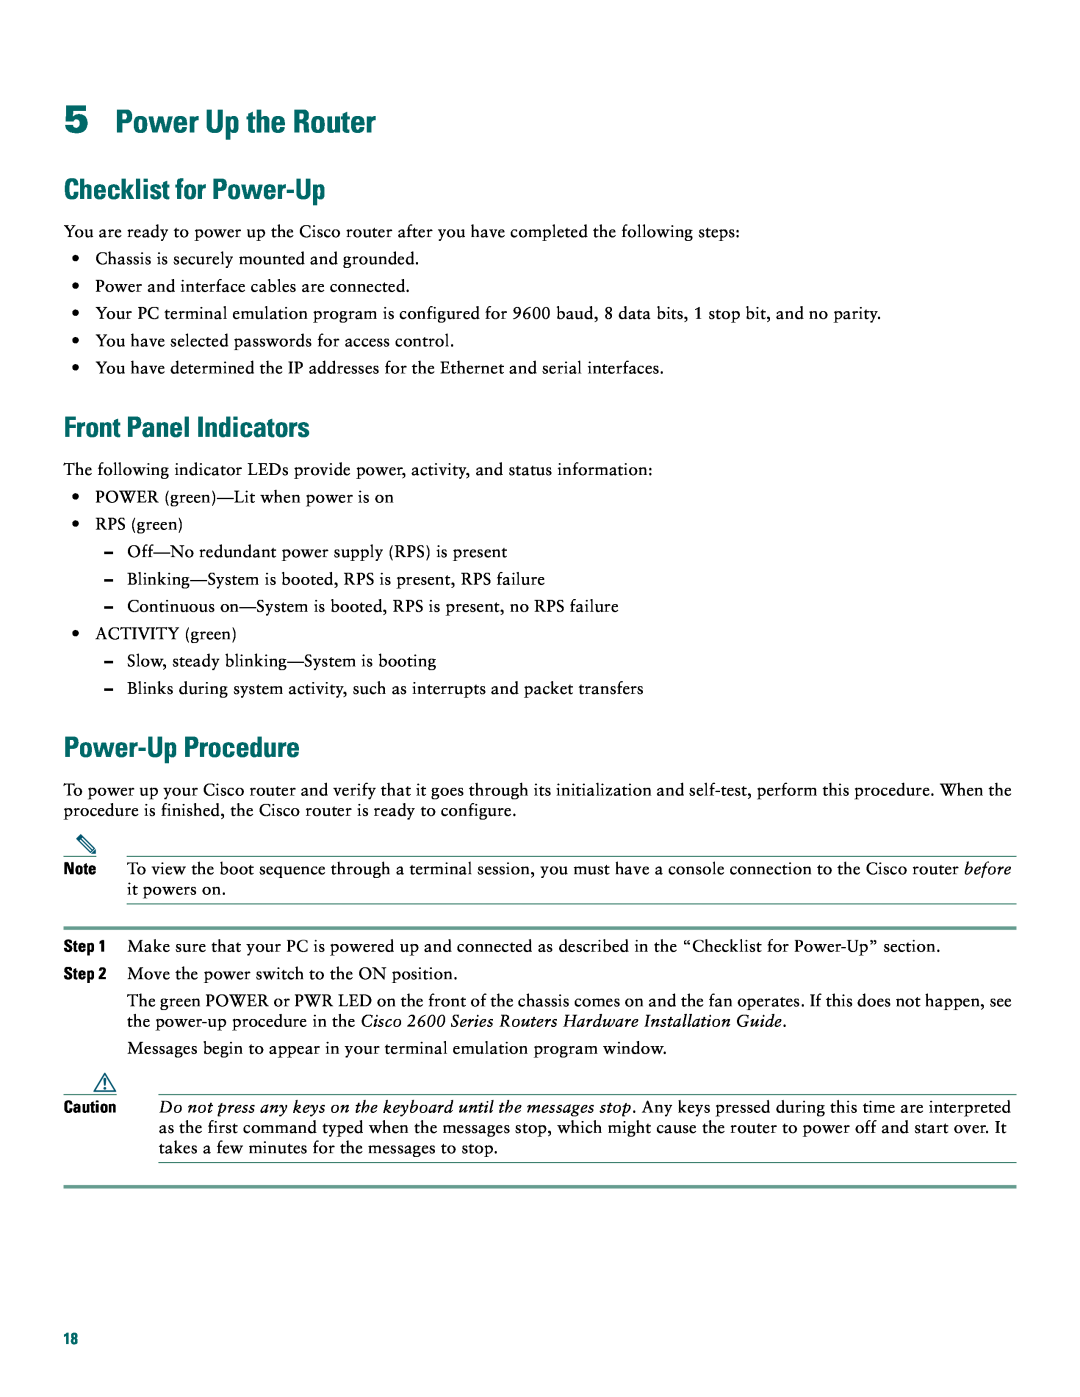 Cisco Systems 2600XM, 2612 Power Up the Router, Checklist for Power-Up, Front Panel Indicators, Power-Up Procedure 